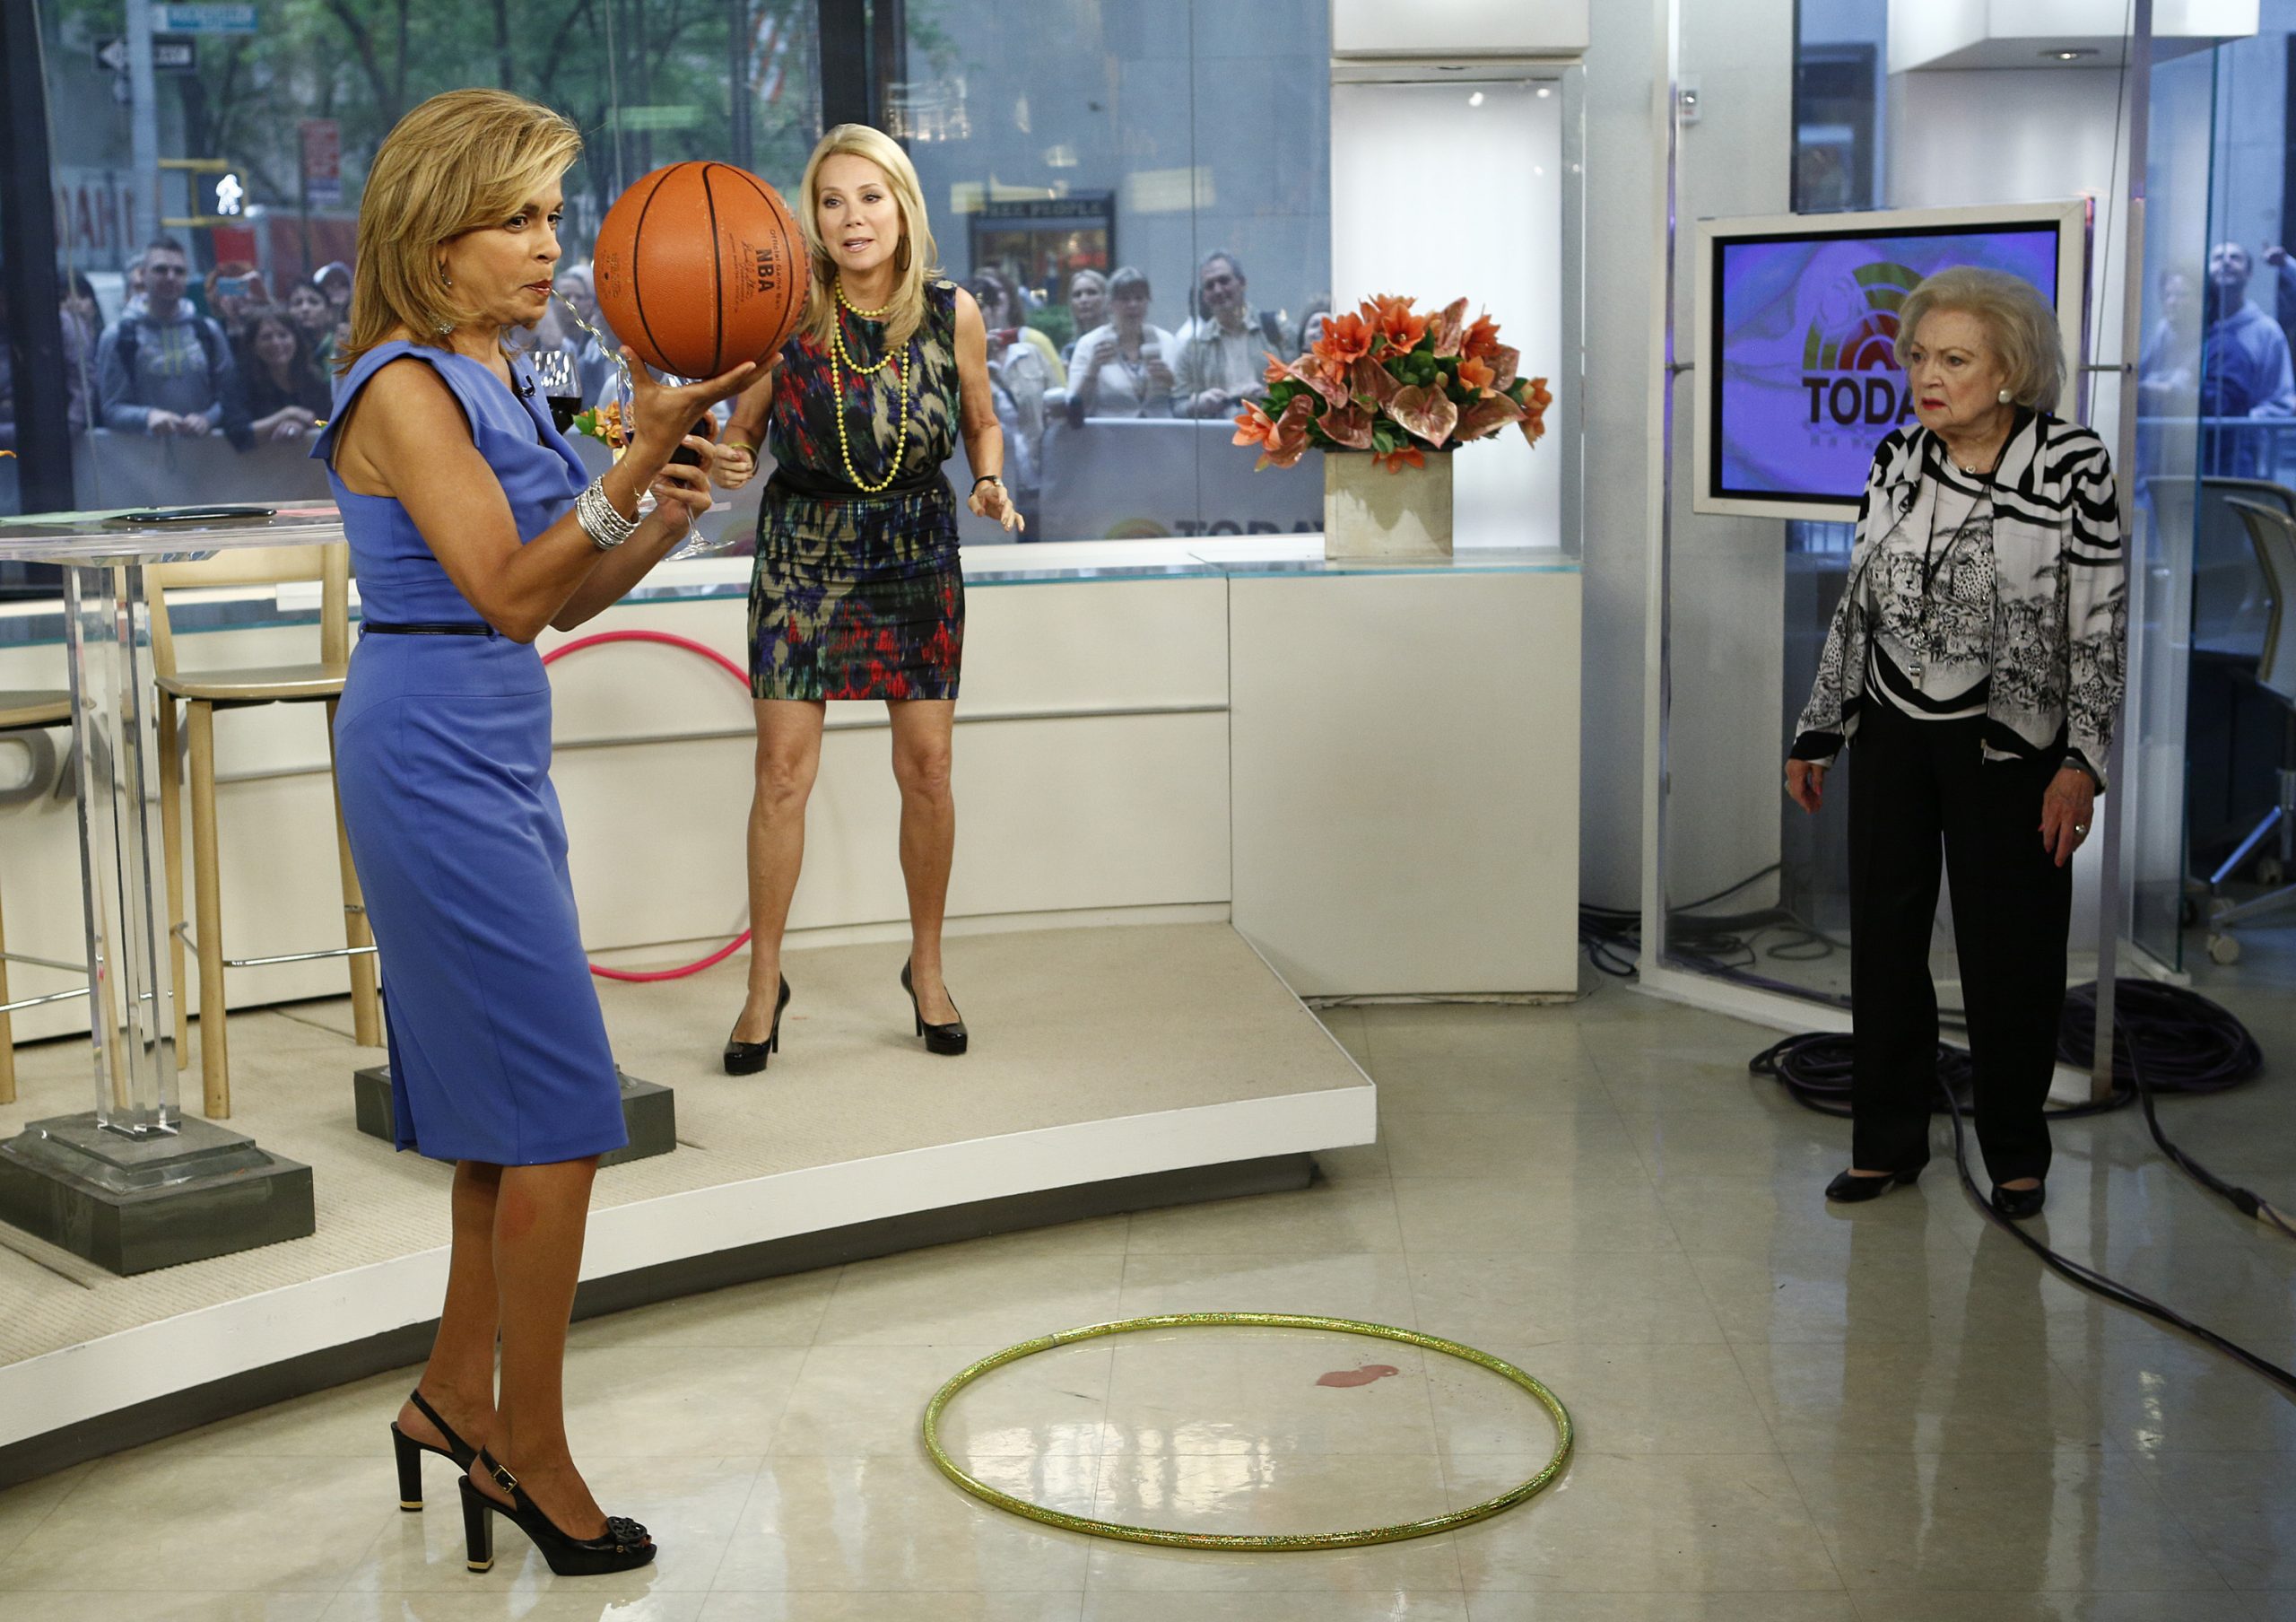 Pictured: (l-r) Hoda Kotb, Kathy Lee Gifford and Betty White appear on NBC News' "Today" show.